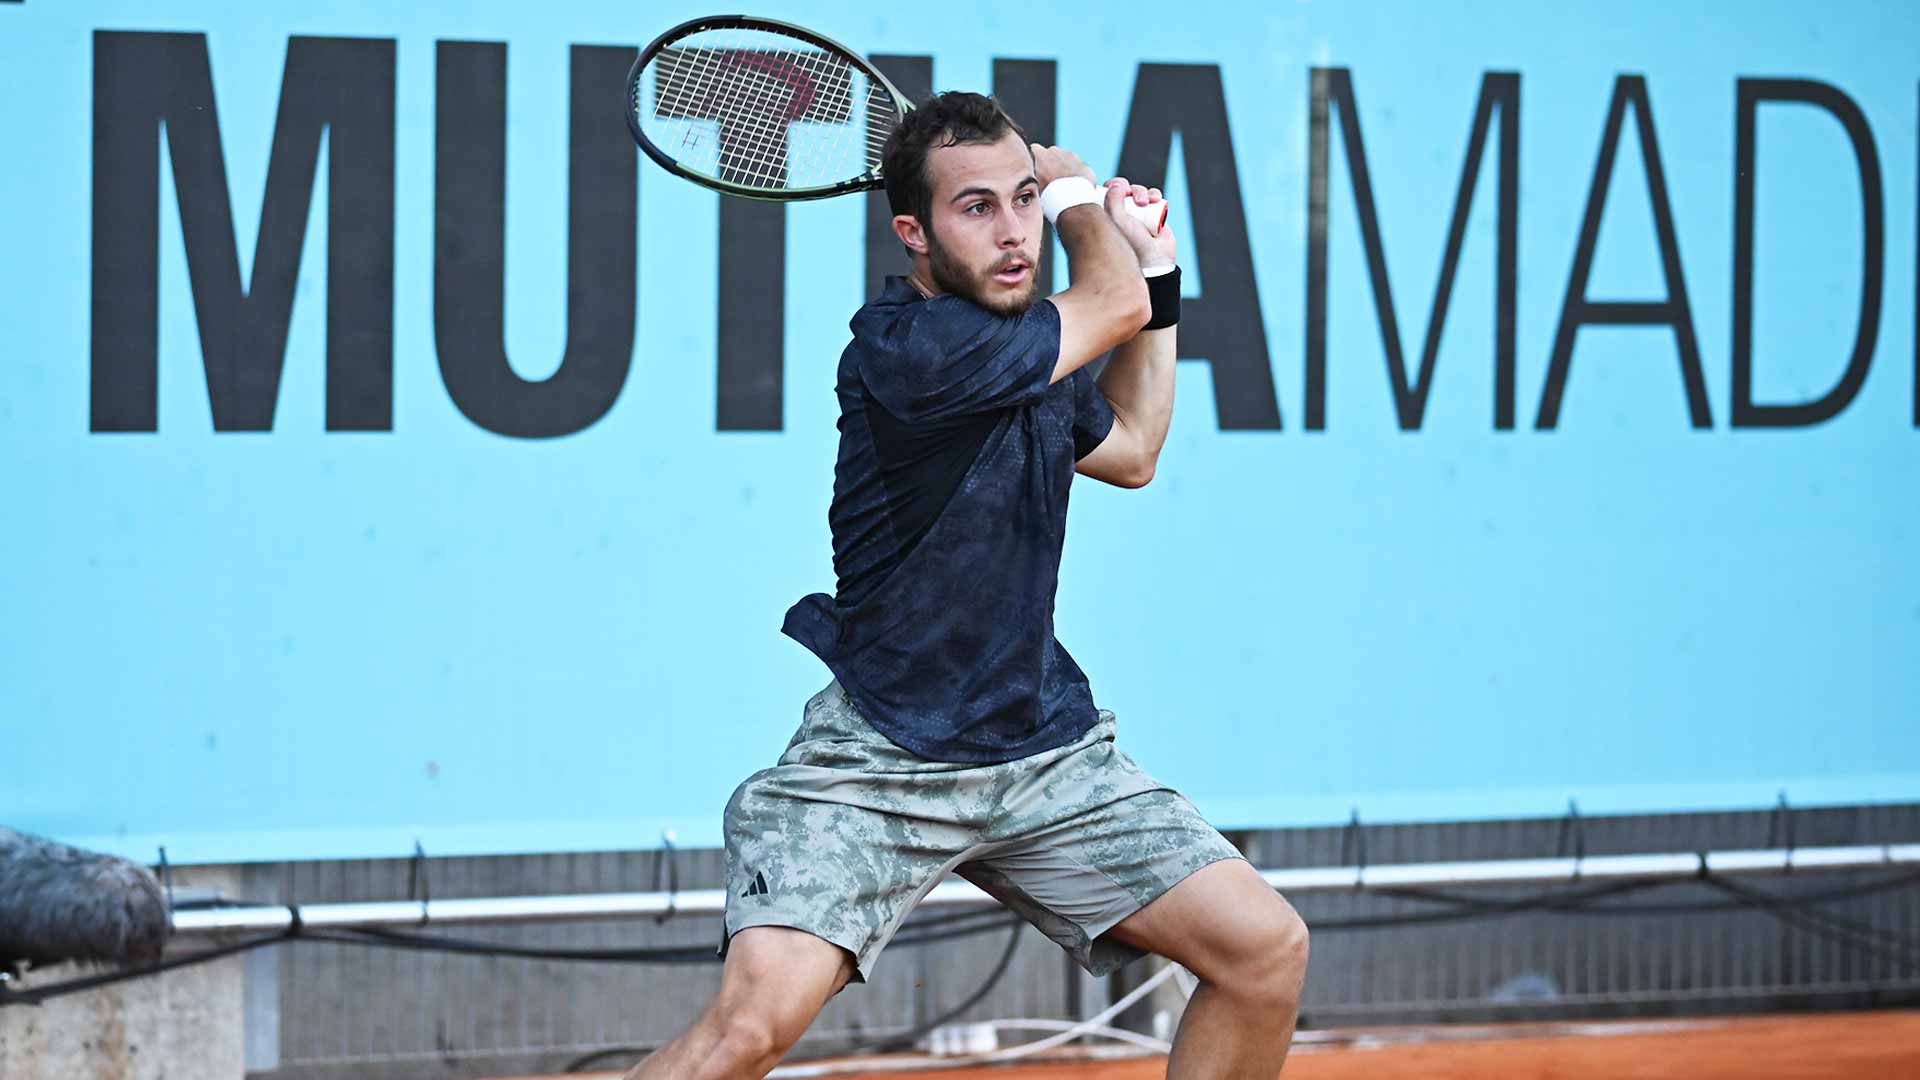 Hugo Gaston beats Jeremy Chardy for his first ATP Masters 1000 win of the year on Wednesday in Madrid.